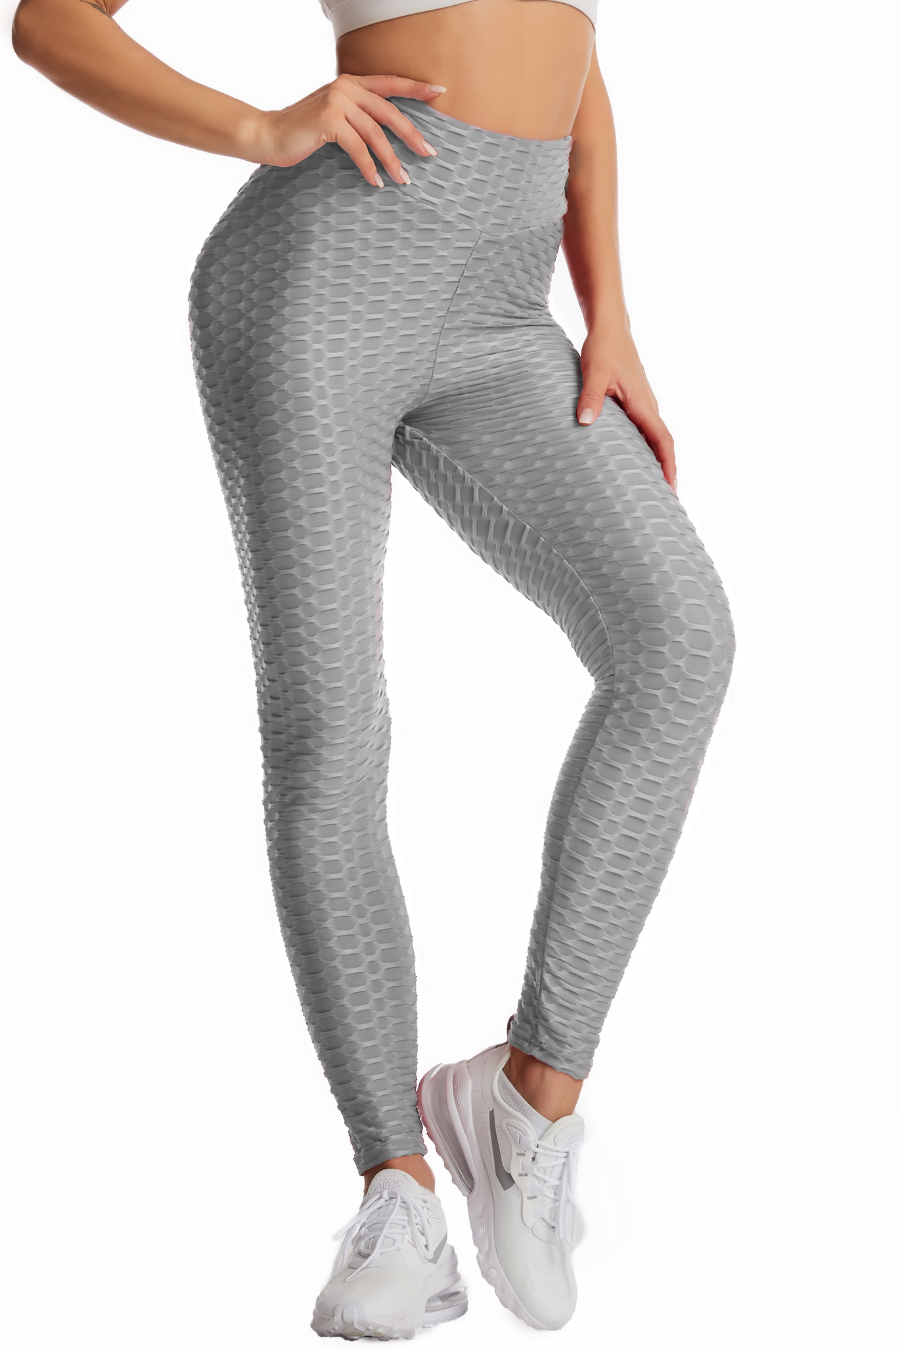 Sports Leggings For Women Matalan  International Society of Precision  Agriculture